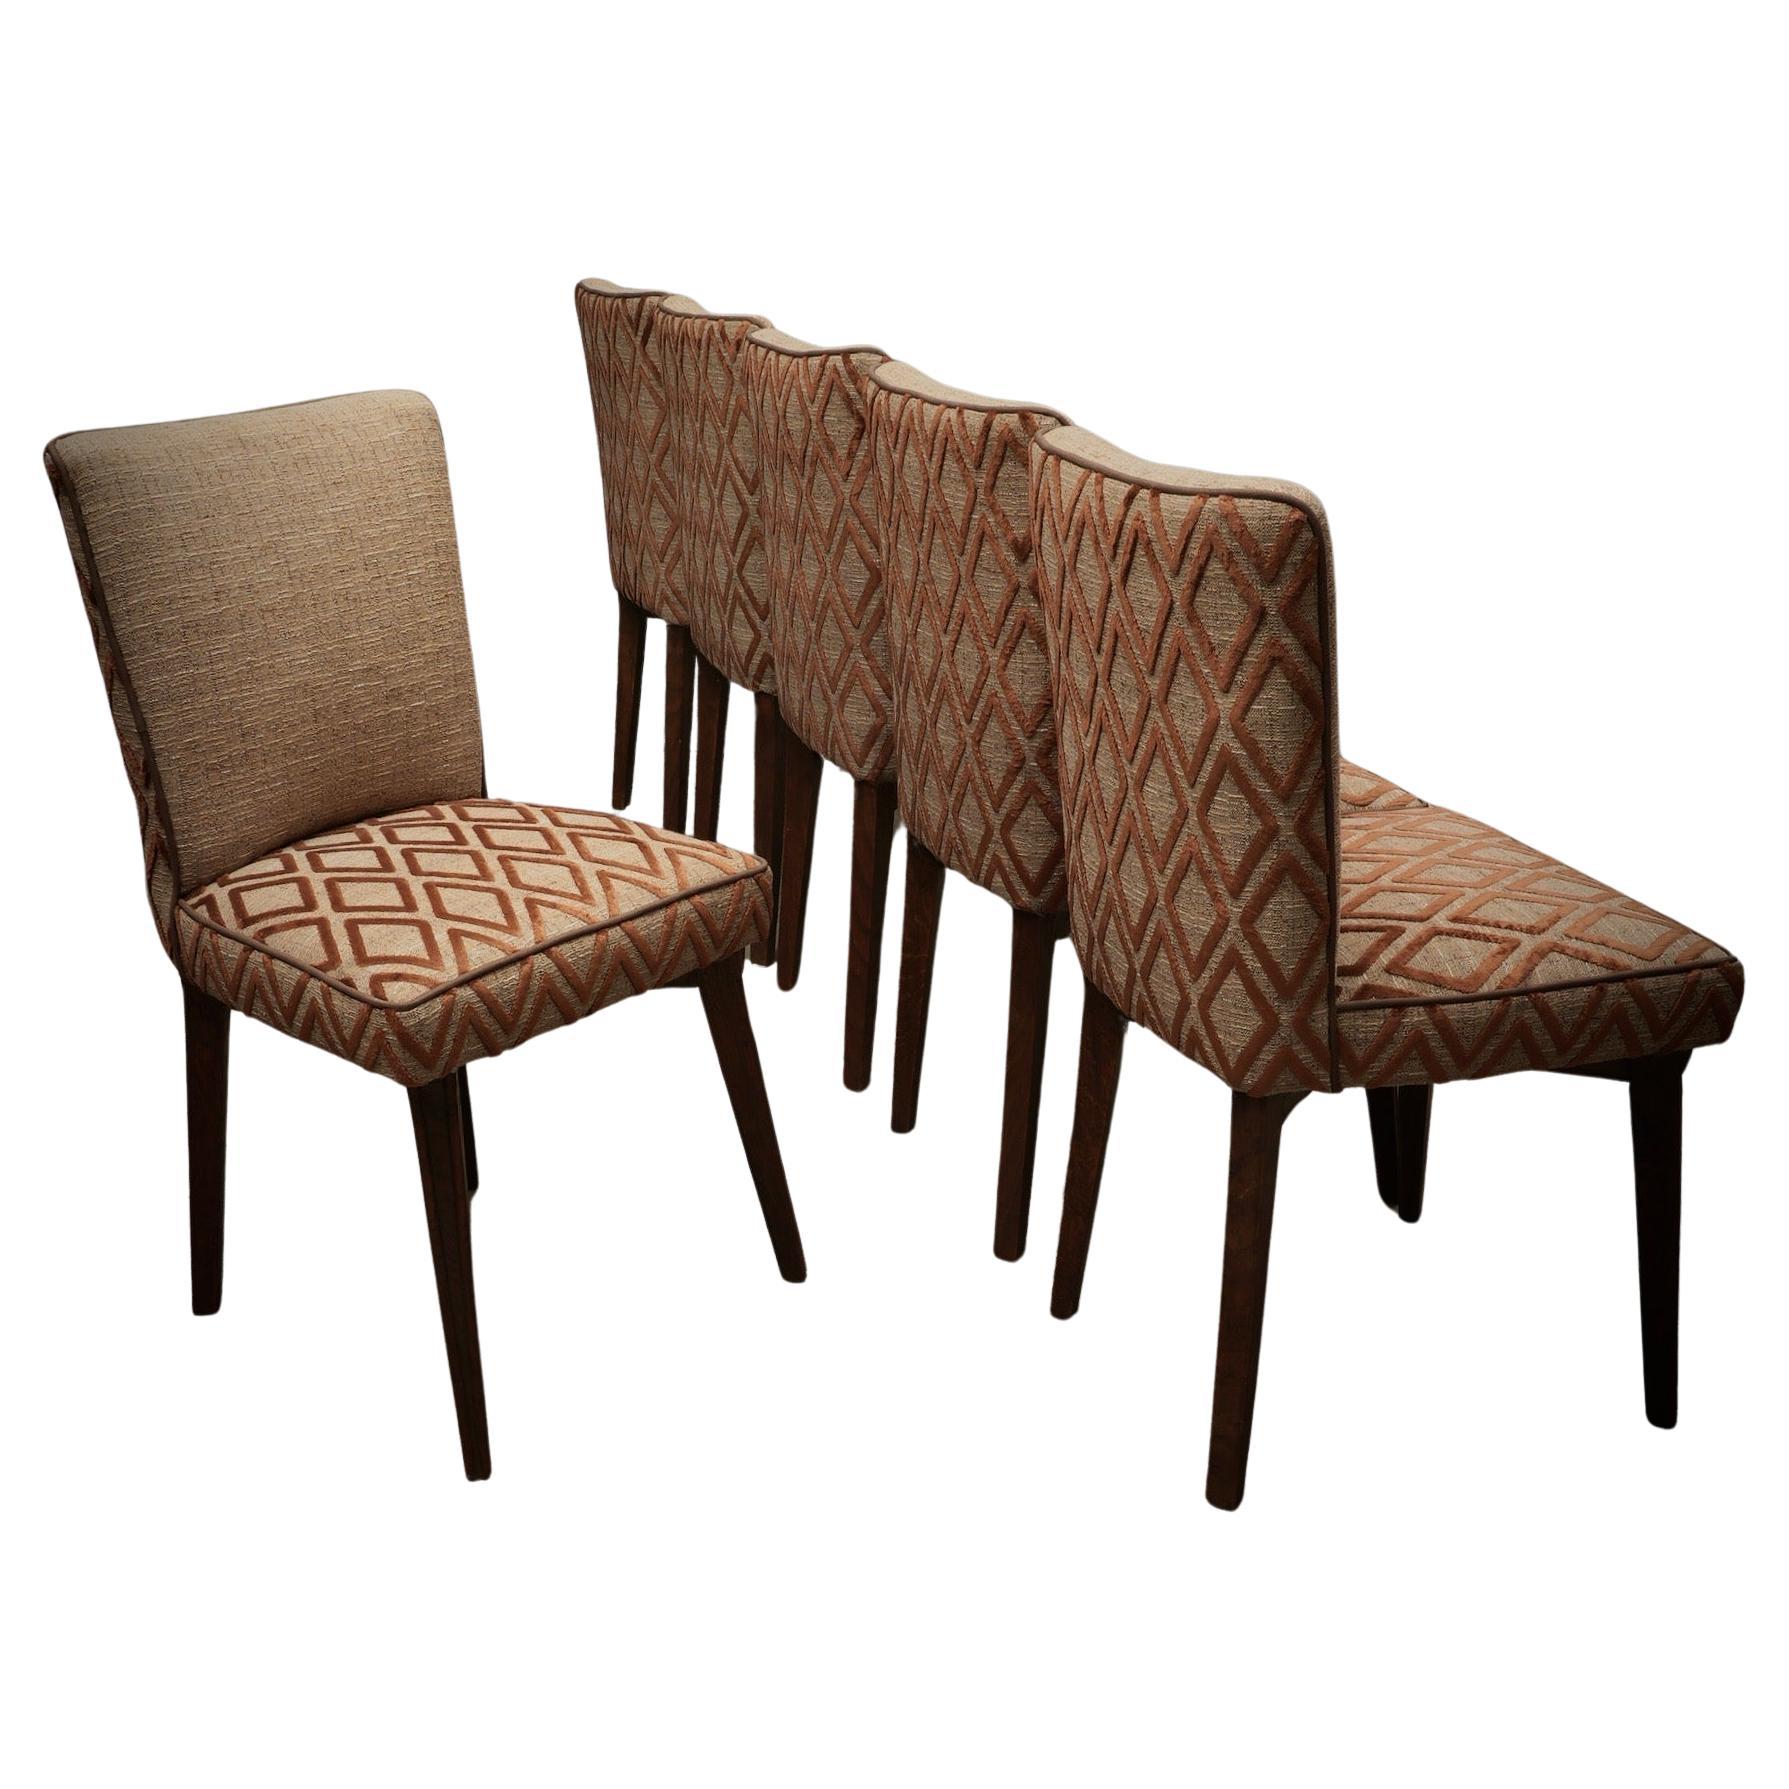 Pierluigi Colli Ash Wood and Brown Fabric Italian Dinning Room Chairs, 1950 For Sale